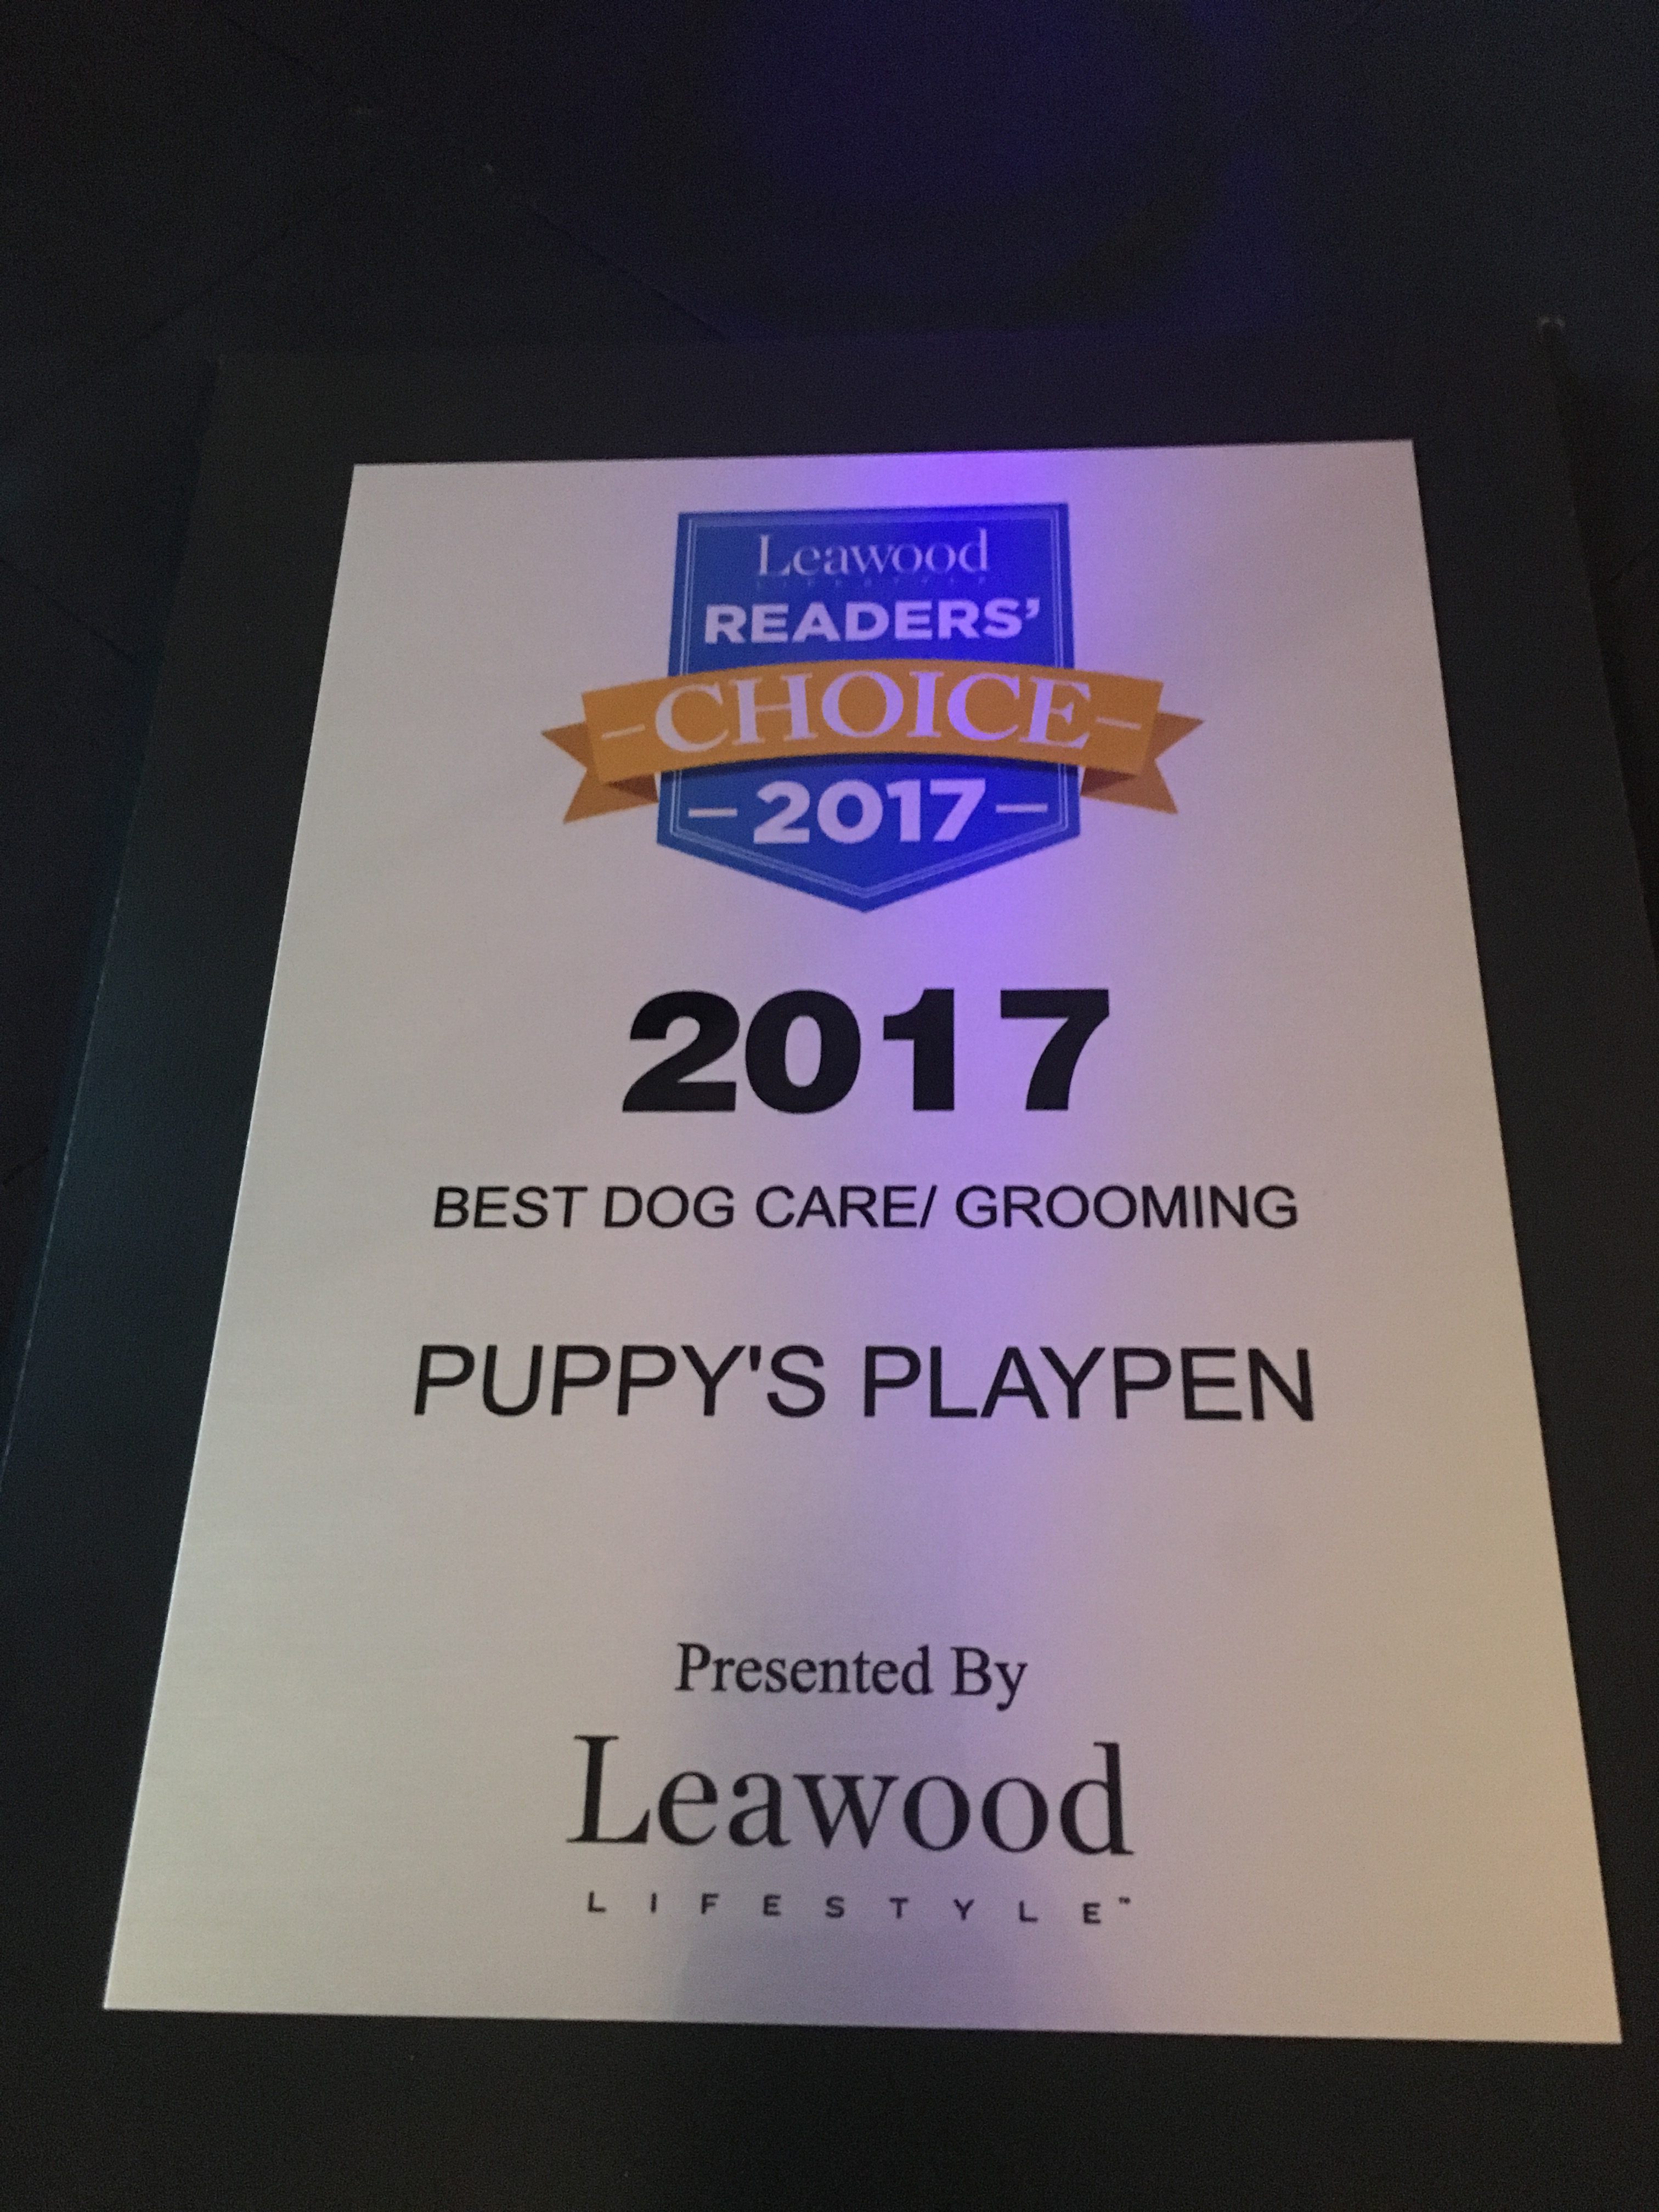 Leawood Lifestyle Readers' Choice: Best Dog Care/Grooming